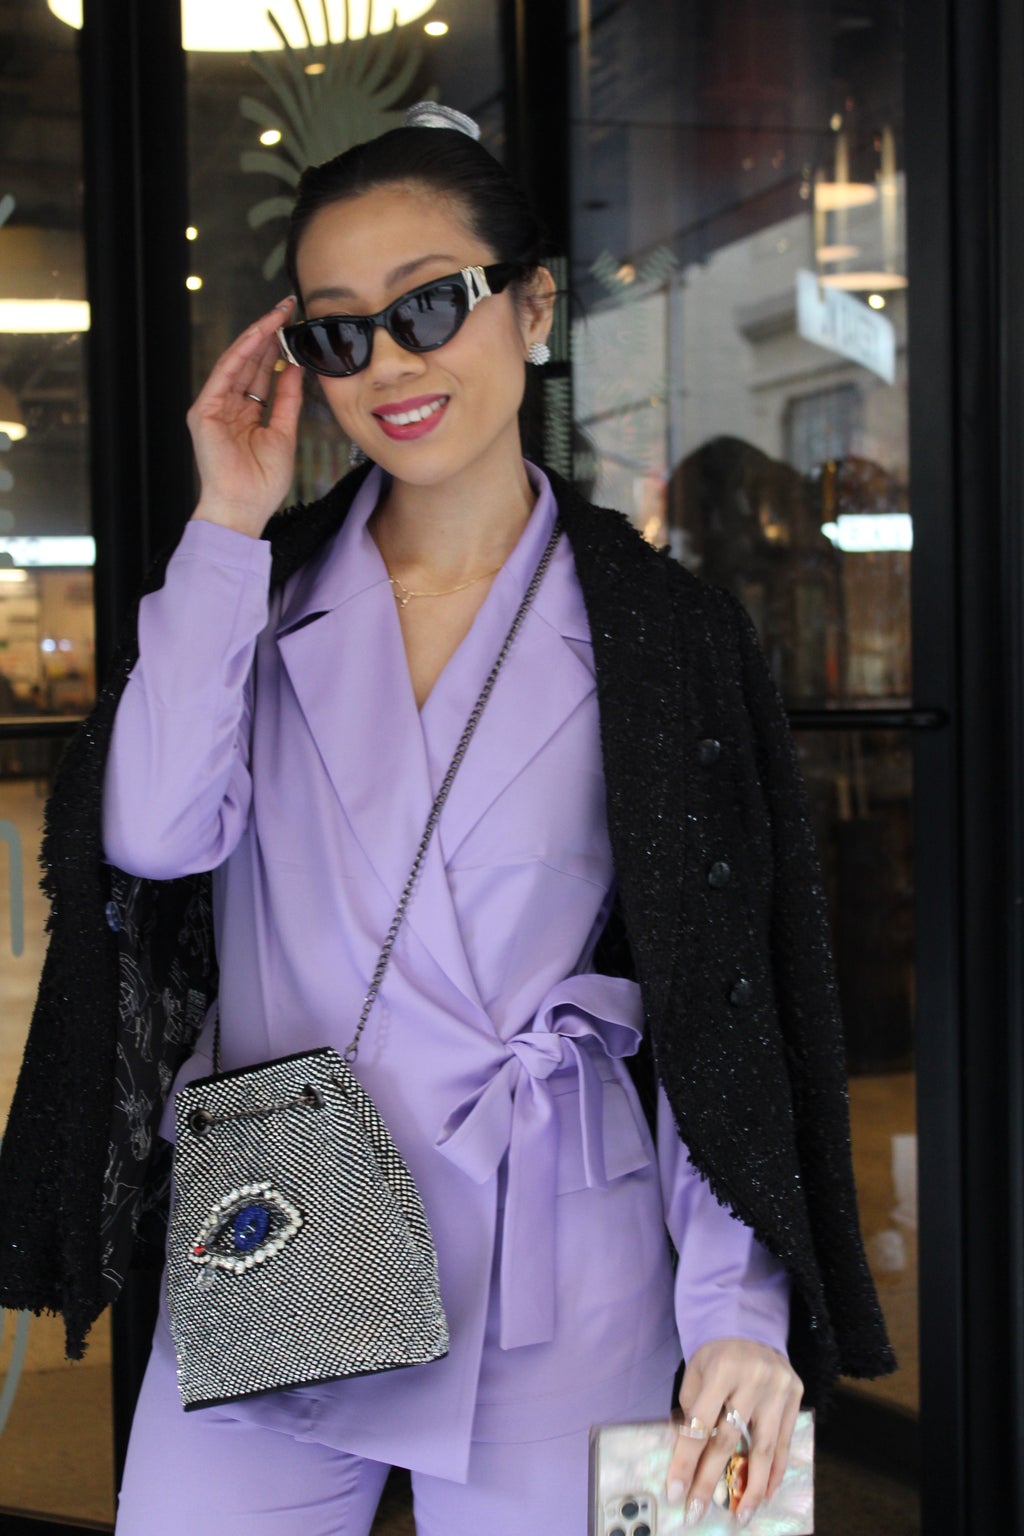 Woman in purple suit holding her sunglasses